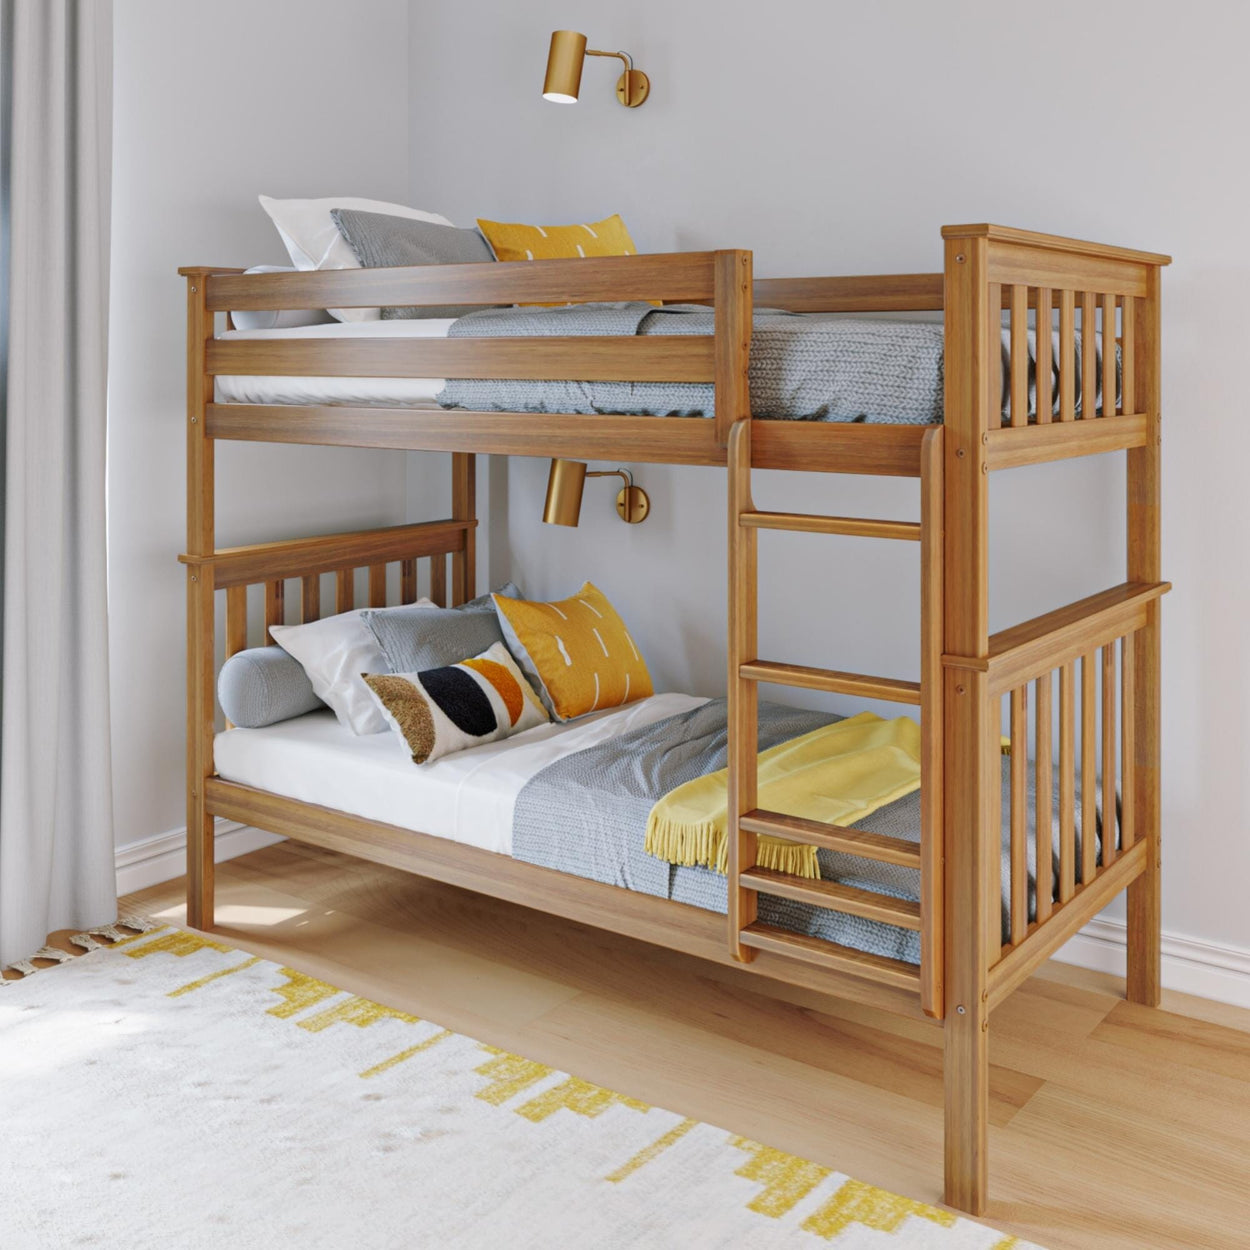 180201-007 : Bunk Beds Classic Twin over Twin Bunk Bed, Pecan